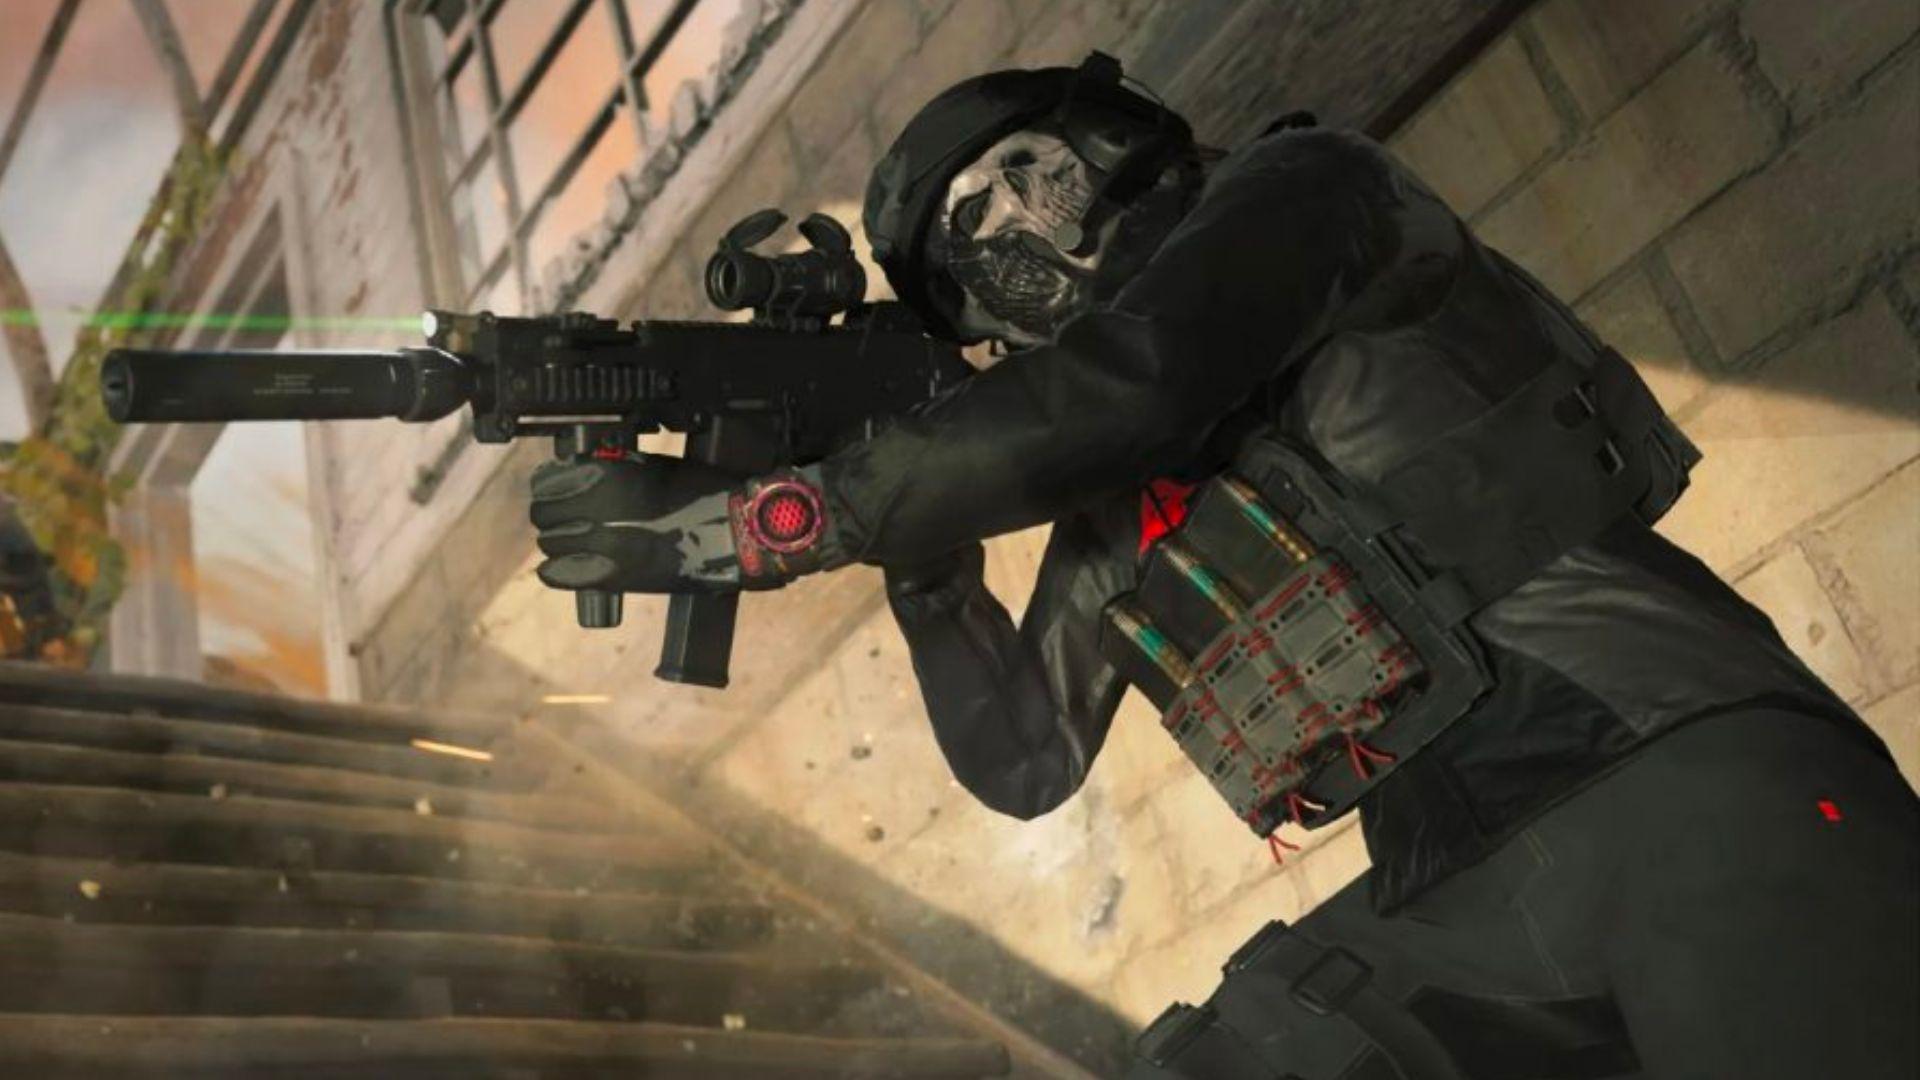 Ghost skin in Modern Warfare 3 standing on stairs aiming gun at enemy